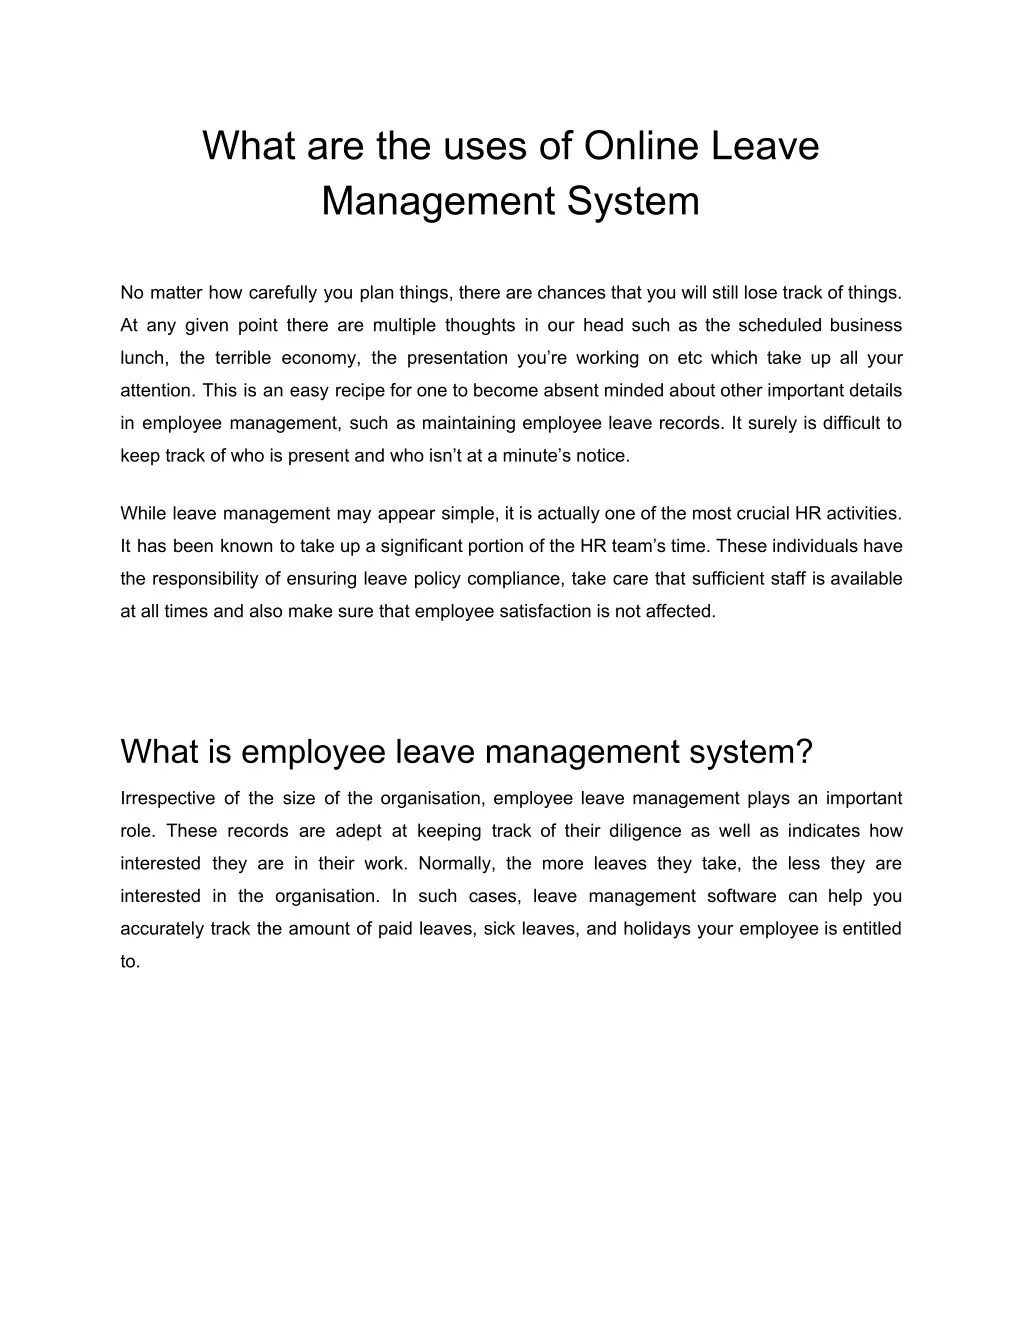 what are the uses of online leave management